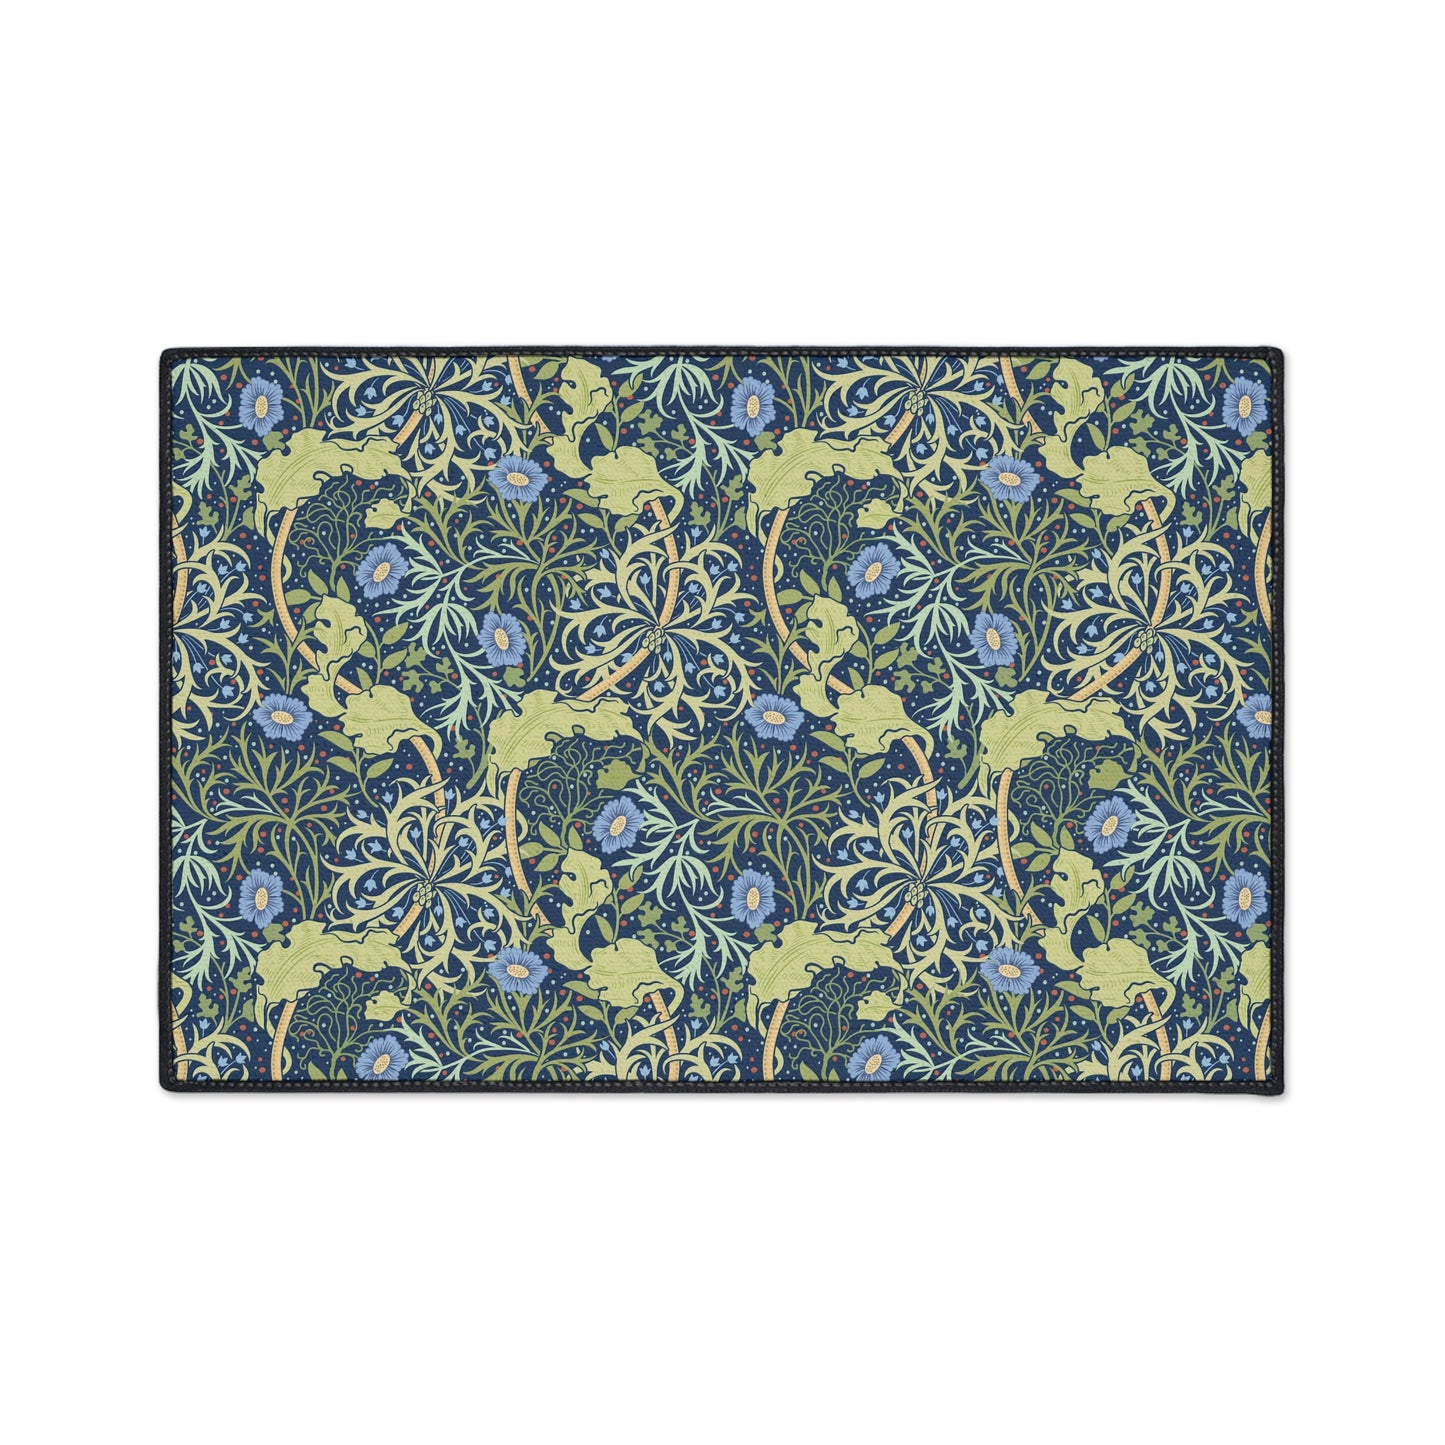 william-morris-co-heavy-duty-floor-mat-seaweed-collection-blue-flowers-6